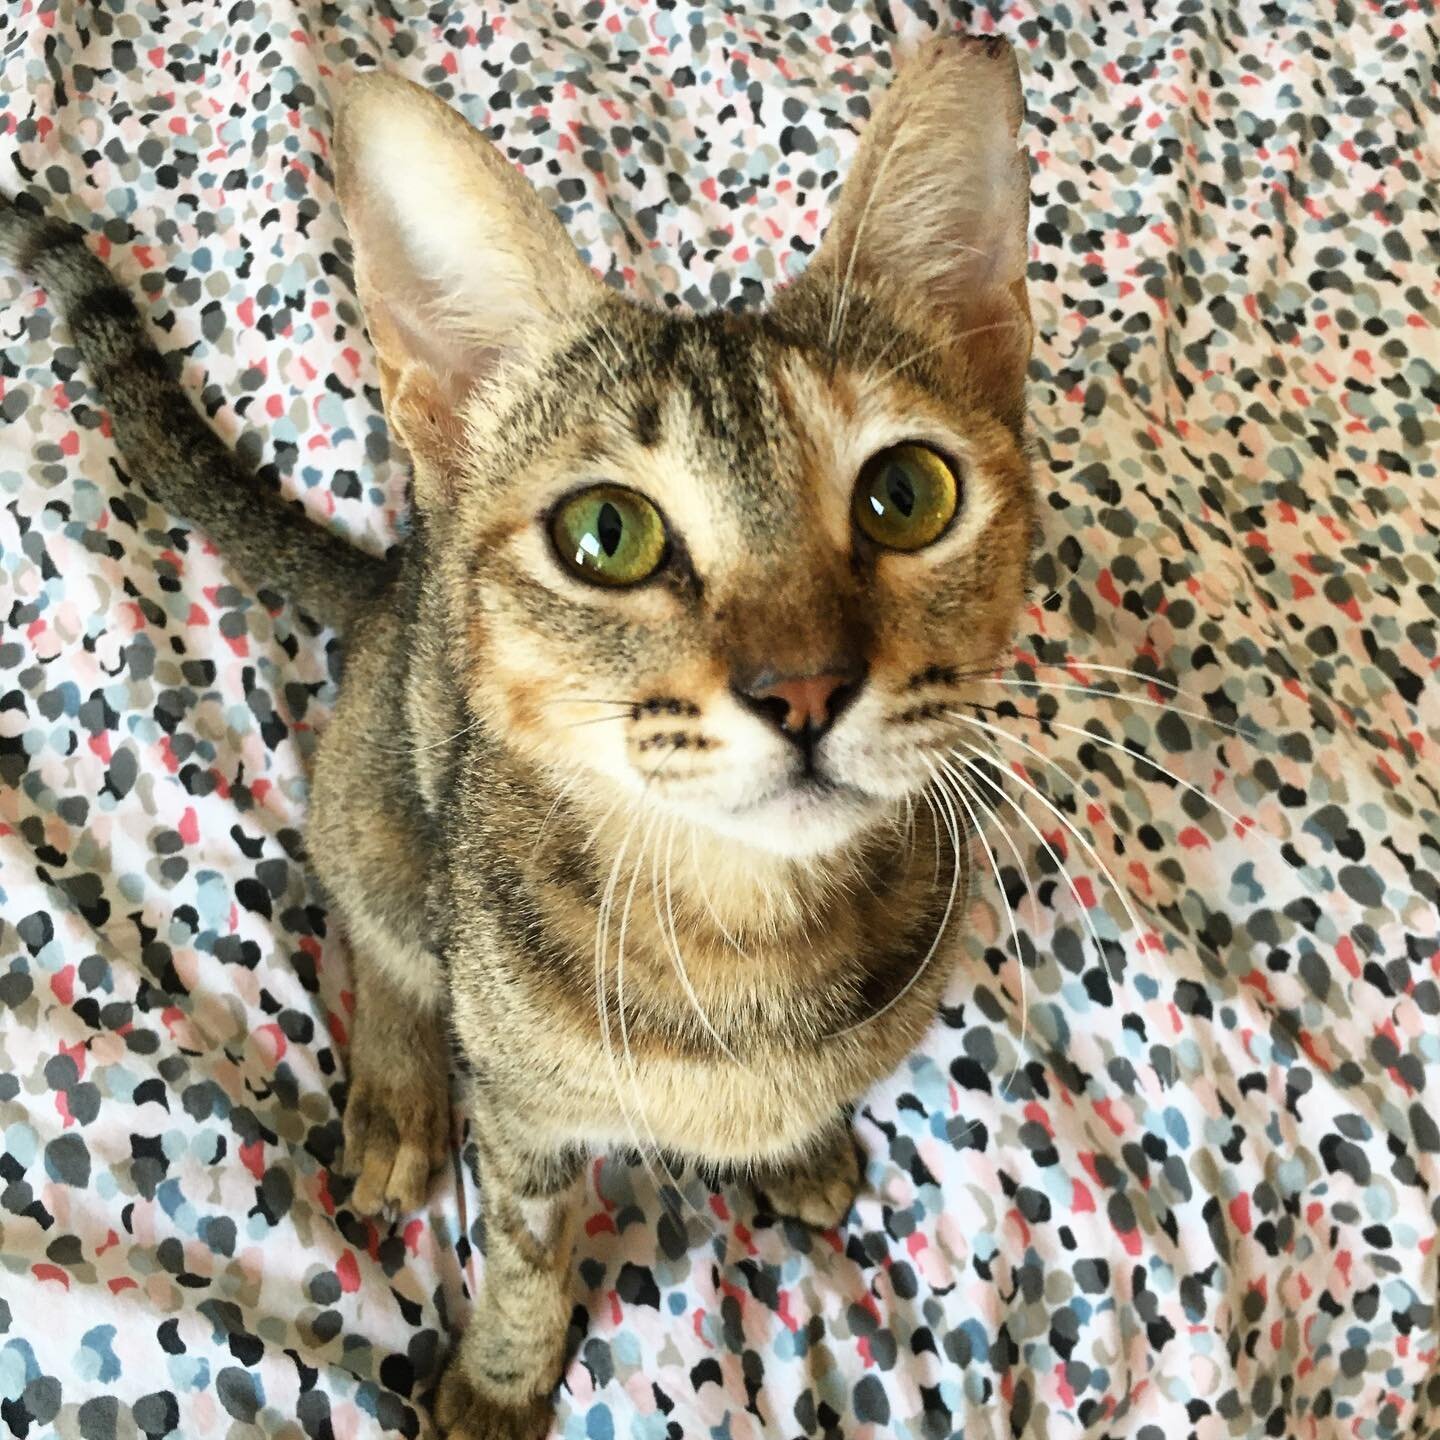 ADOPTION or FOSTERER NEEDED!
Name: Thelma
Age: Approx 1 year 
Breed: Tabby Mau/Bengal spotty tummy
Spayed, FIV/FELV negative.
Likes: Cuddles, tuna, and giving little love nibbles.
Dislikes: An empty food bowl😅
Overseas adoption will be considered. P